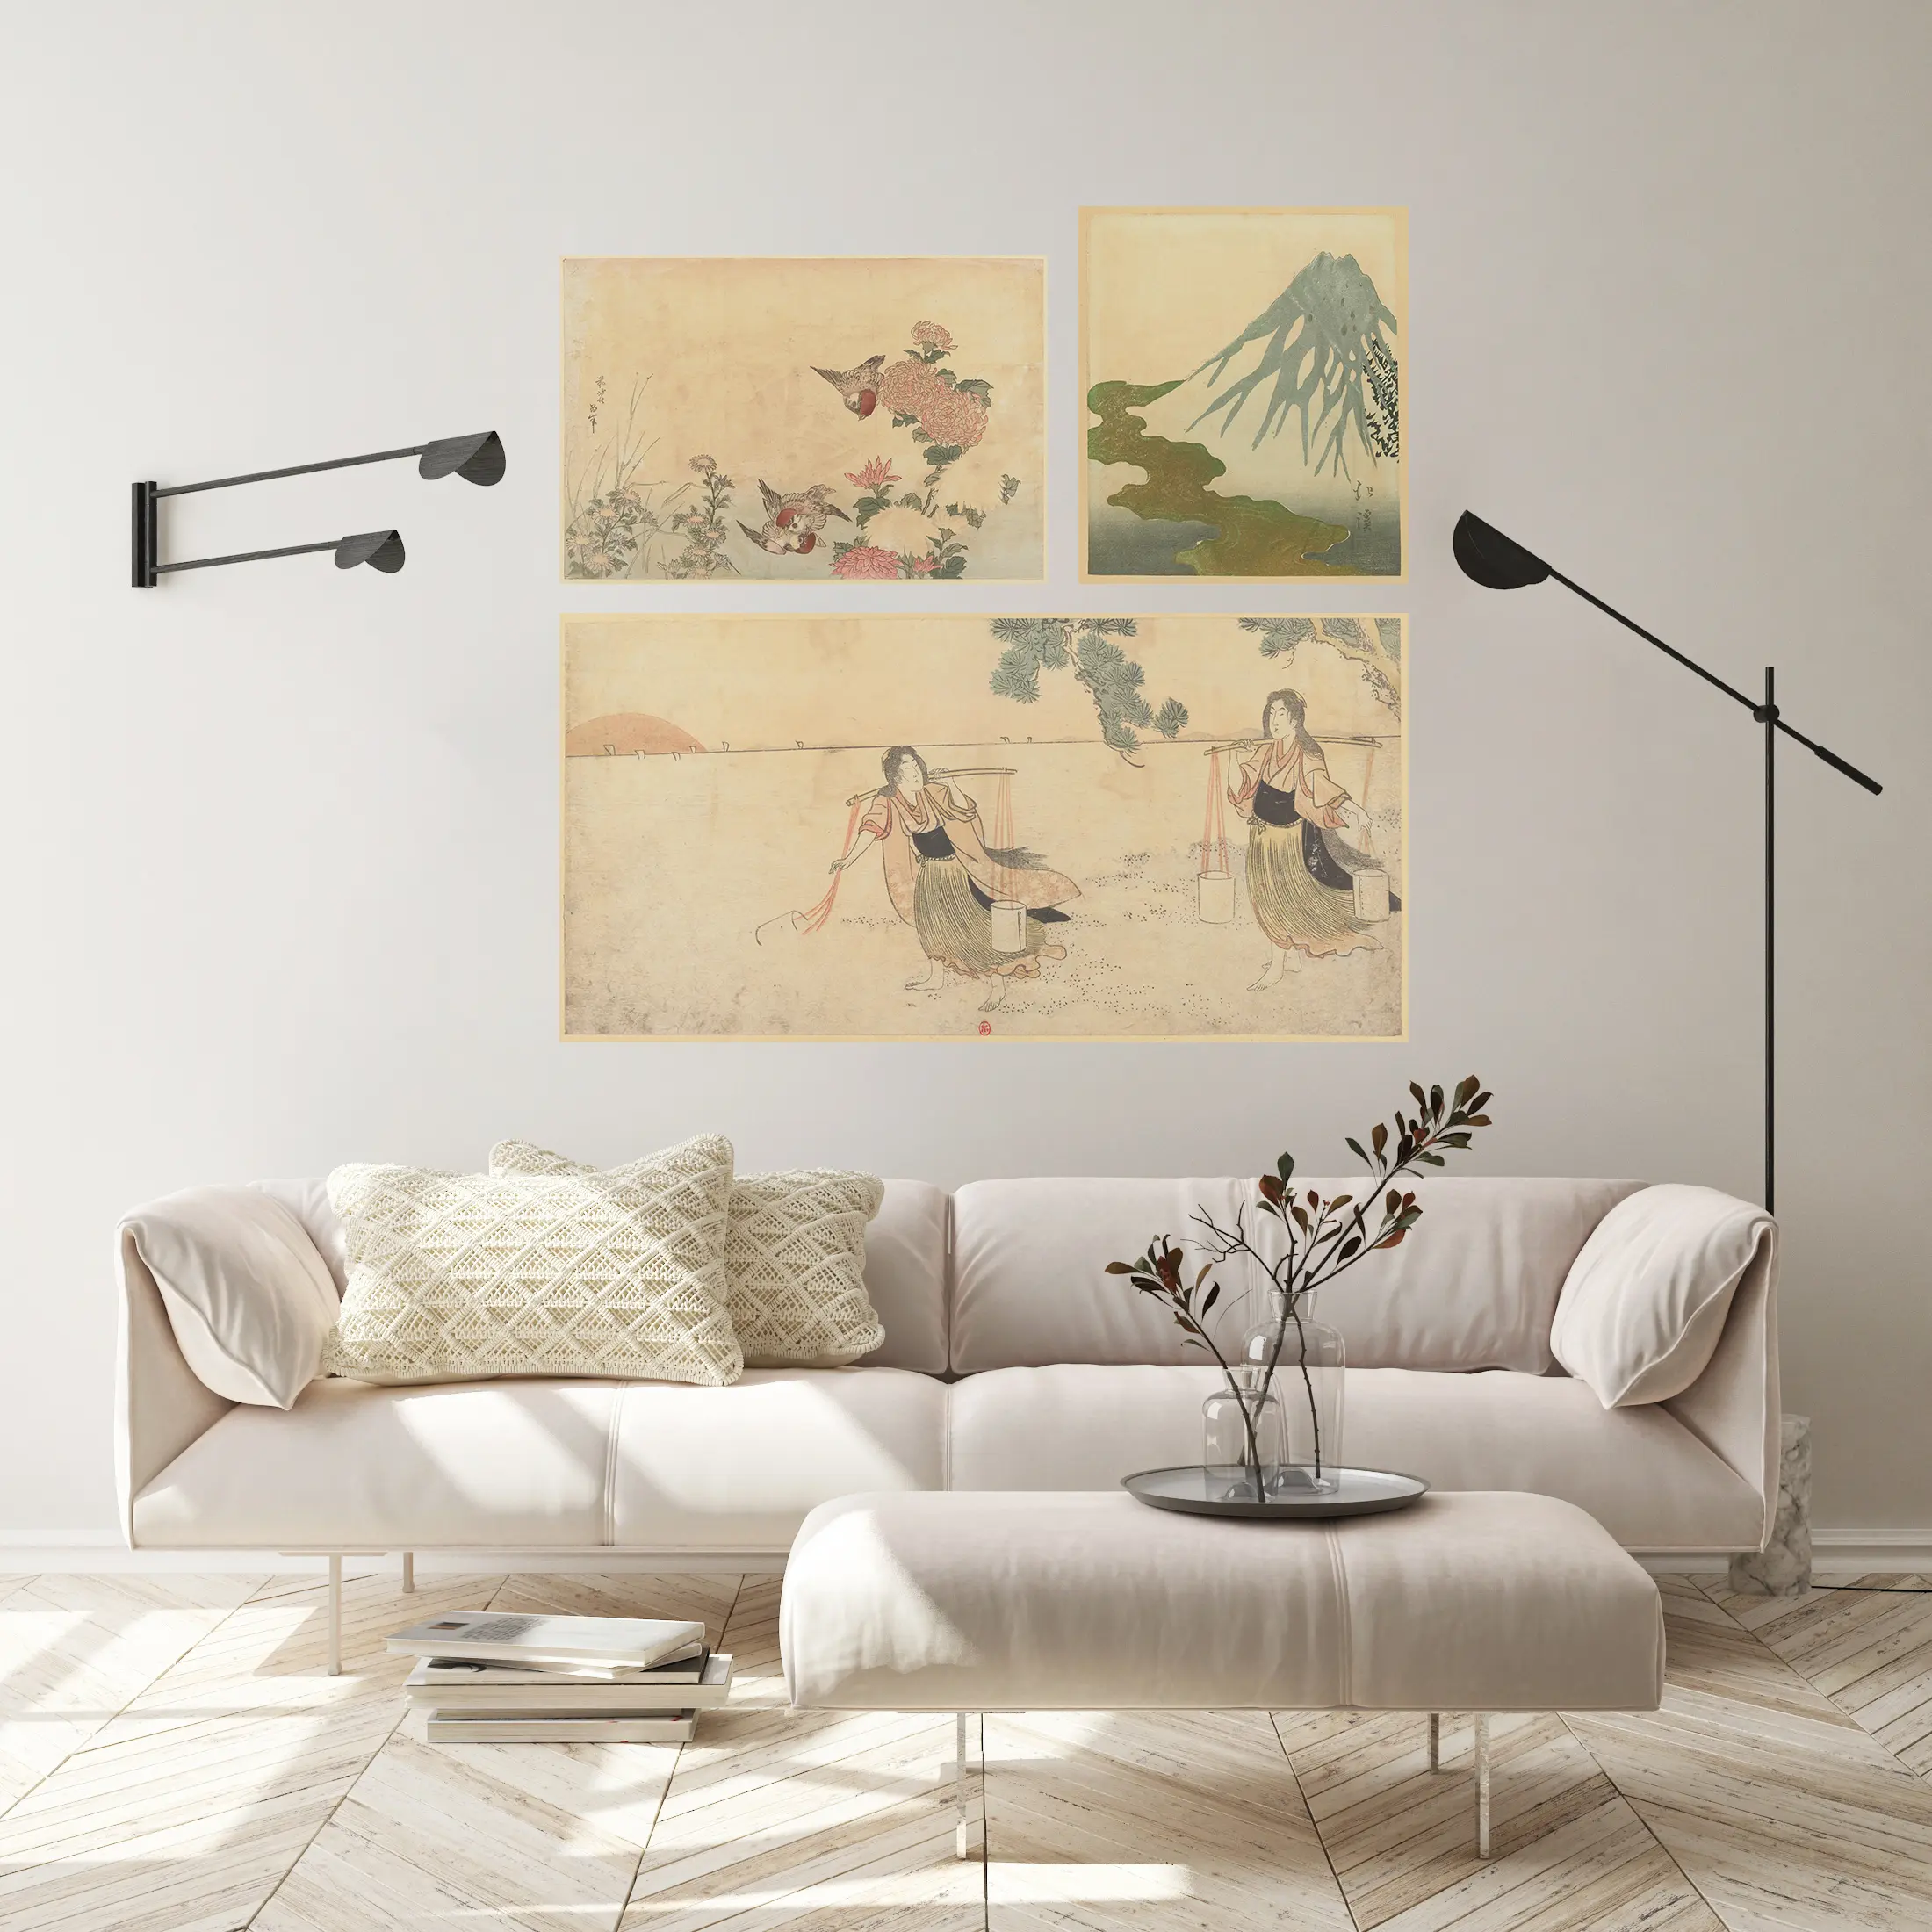 Triptych of Japanese prints, on adhesive canvas placed on the wall of a bright contemporary living room.